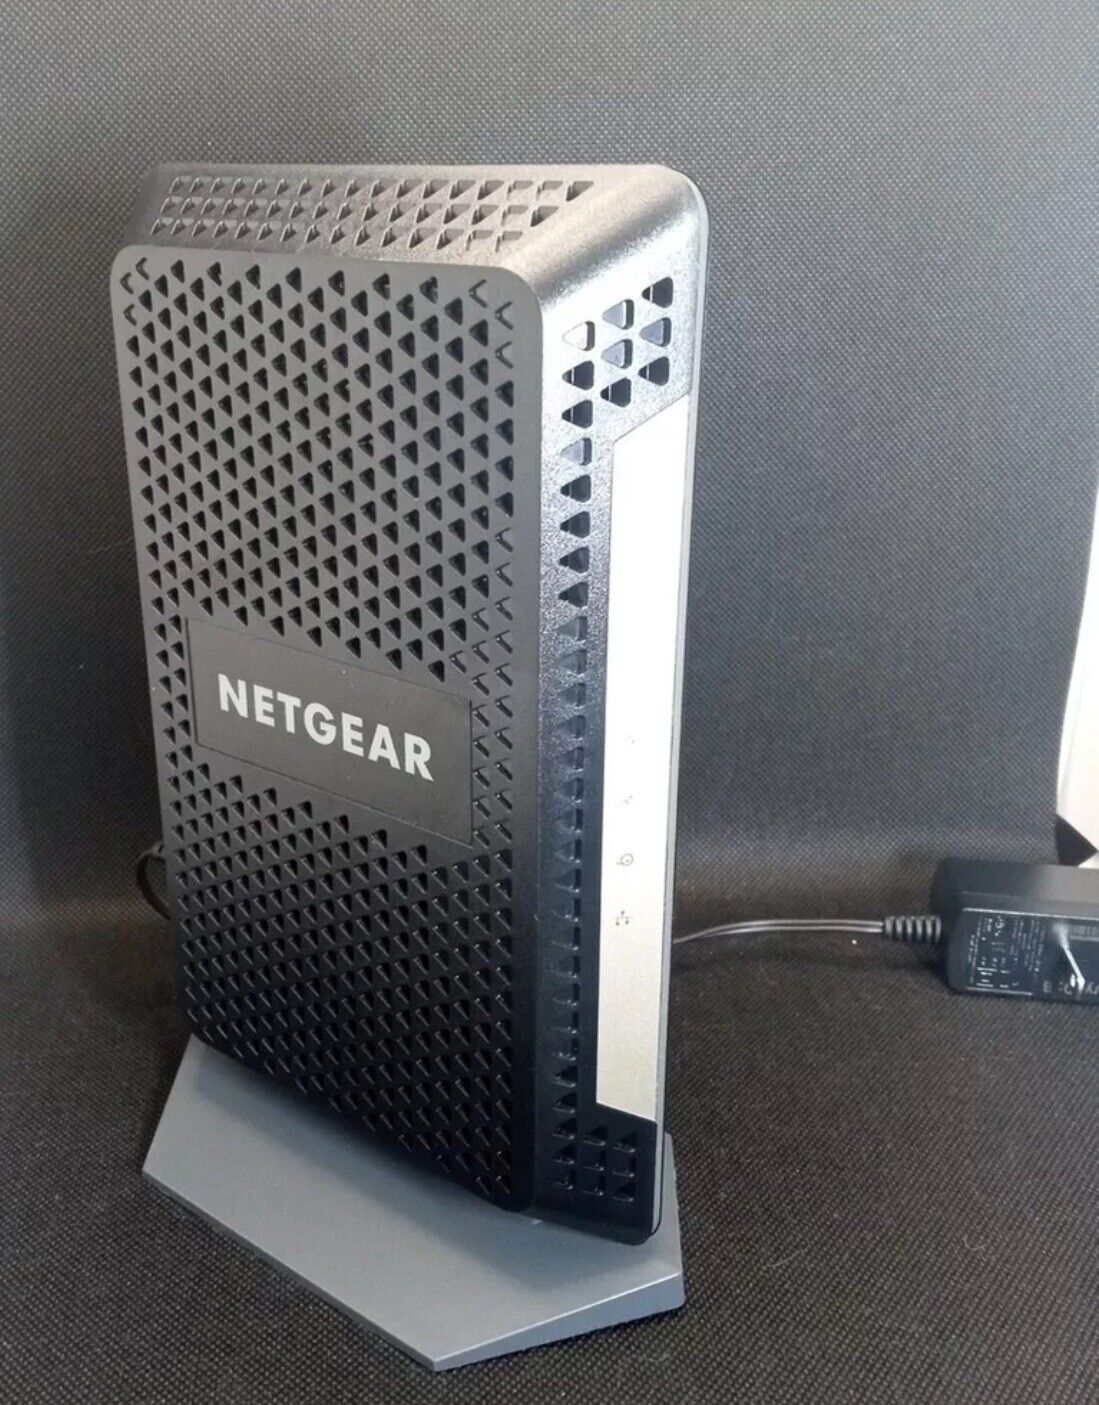 Netgear Cable Modem Cm1000 Used Tested And Working